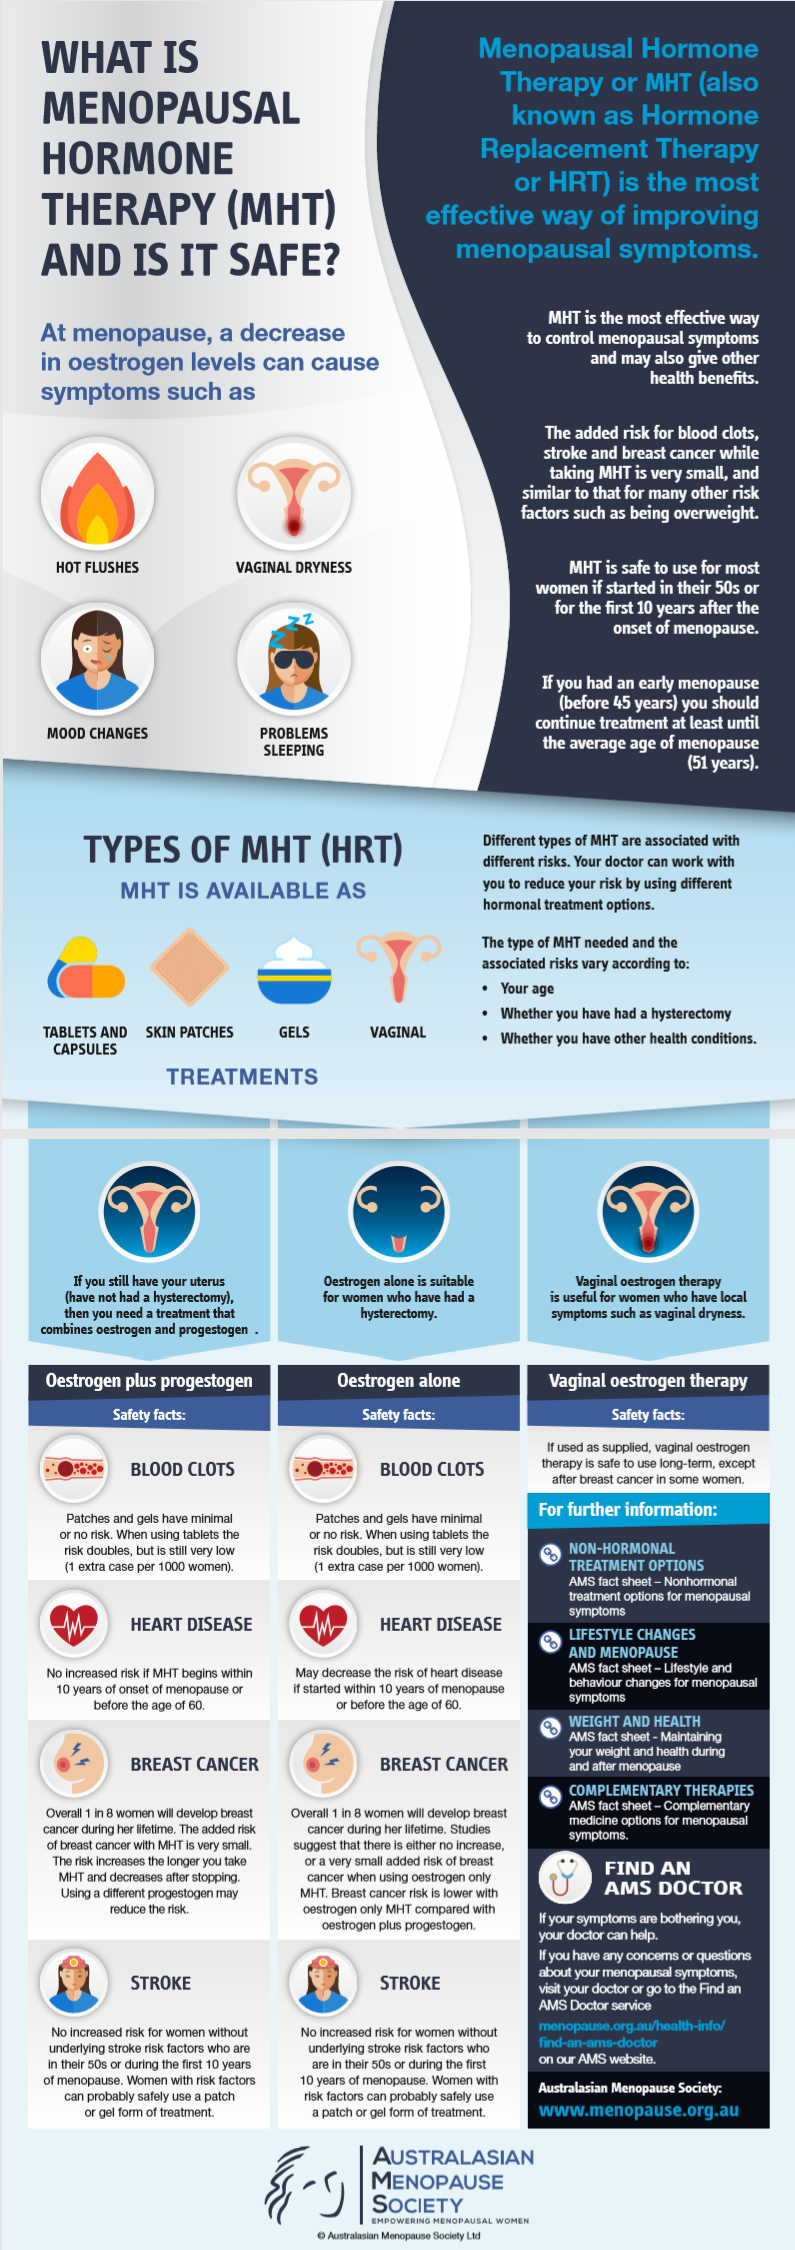 What is MHT and is it safe